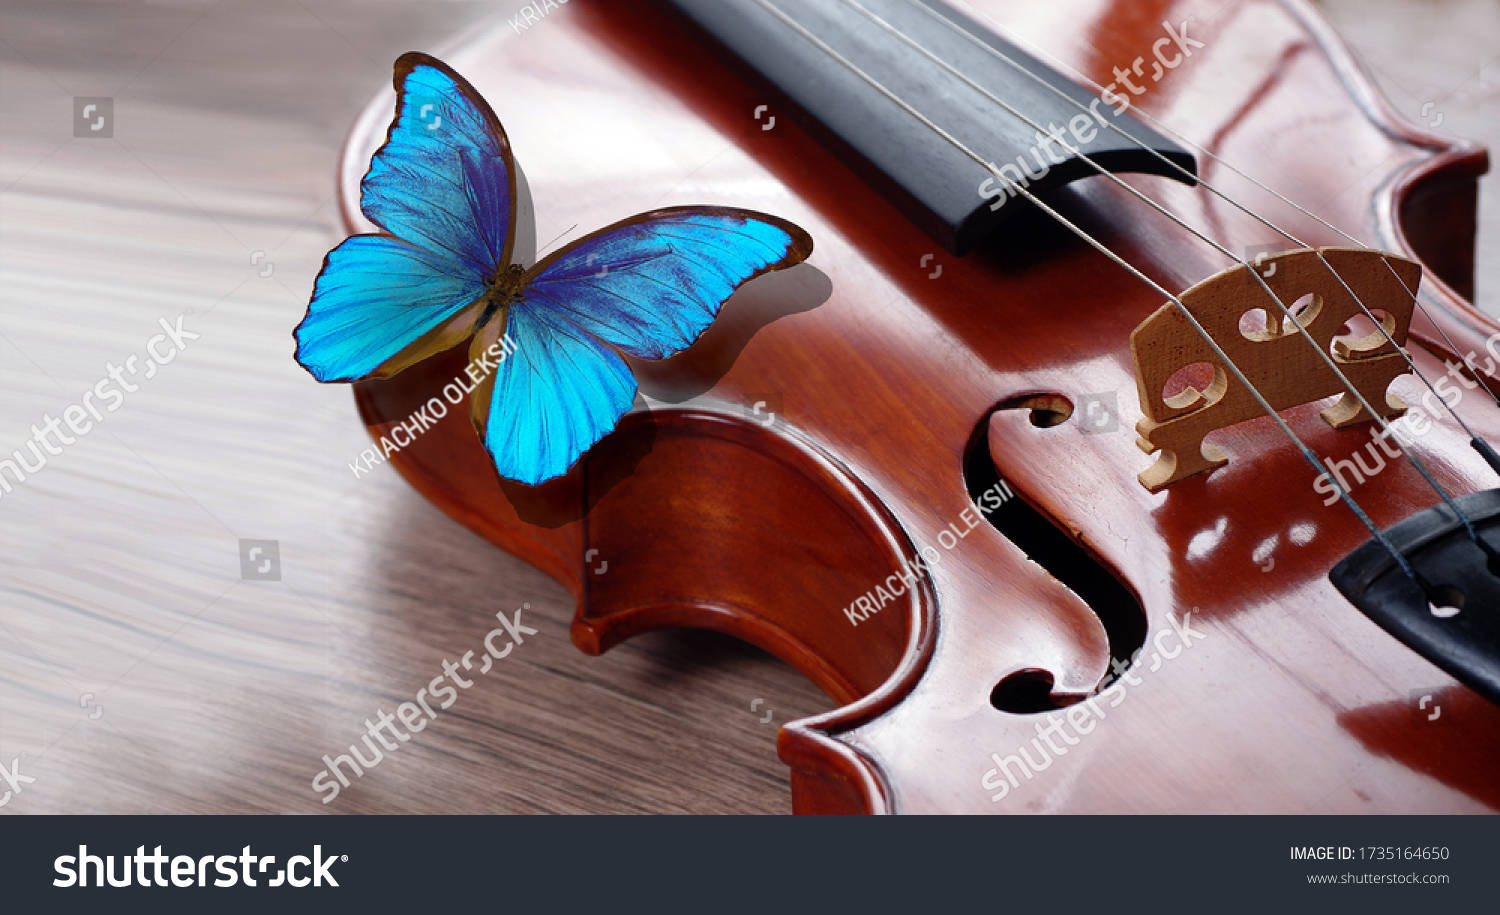 bright blue morpho butterfly sitting on the violin. melody concept #1735164650